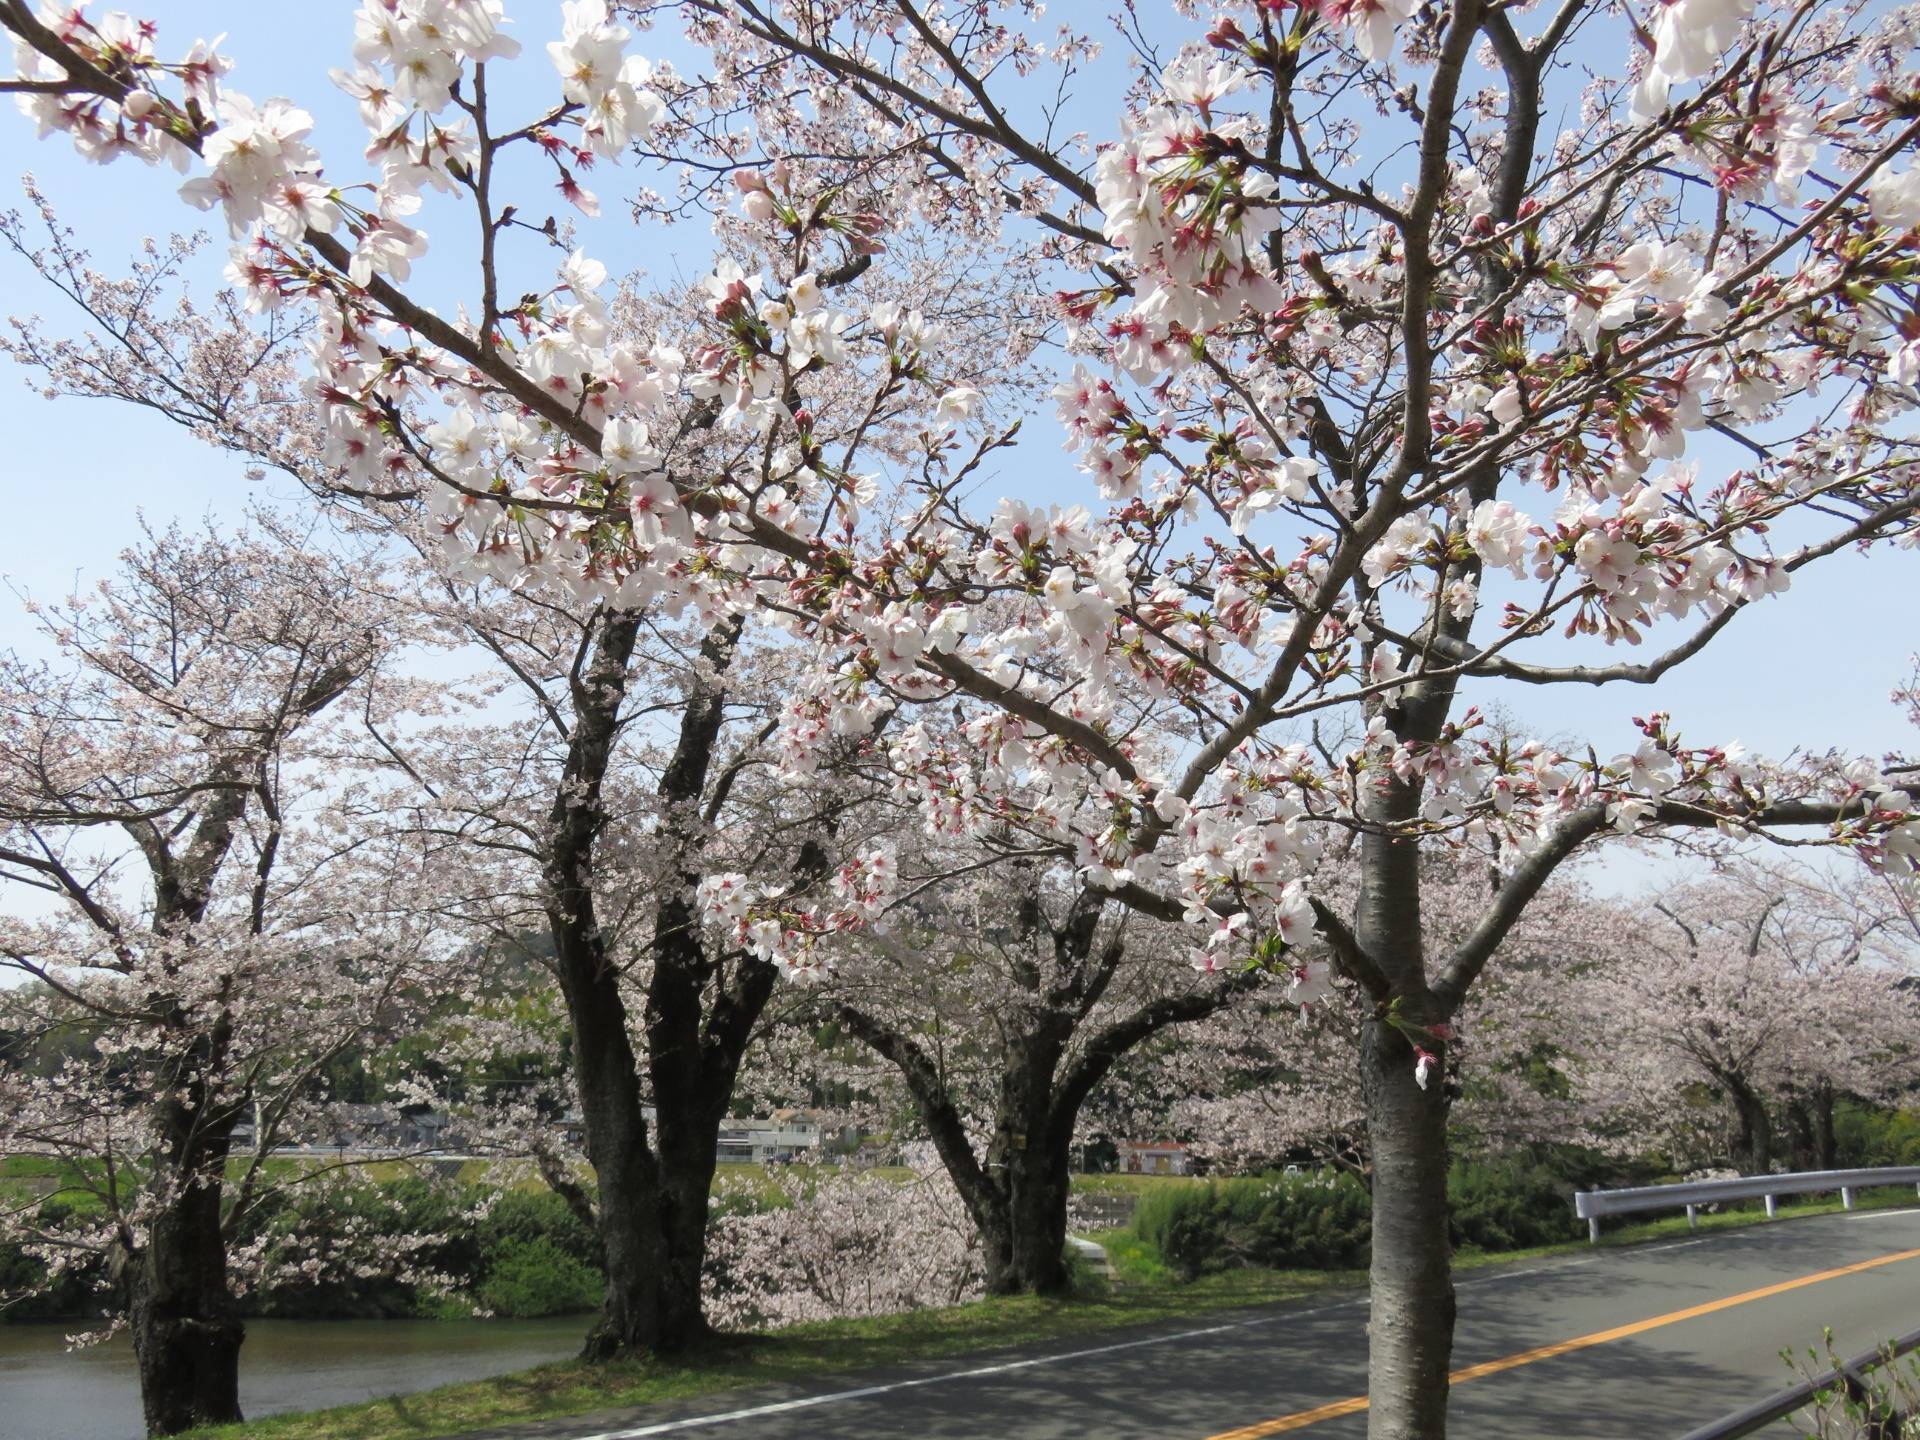 Some Japanese Cherry Blossoms in Izu.
